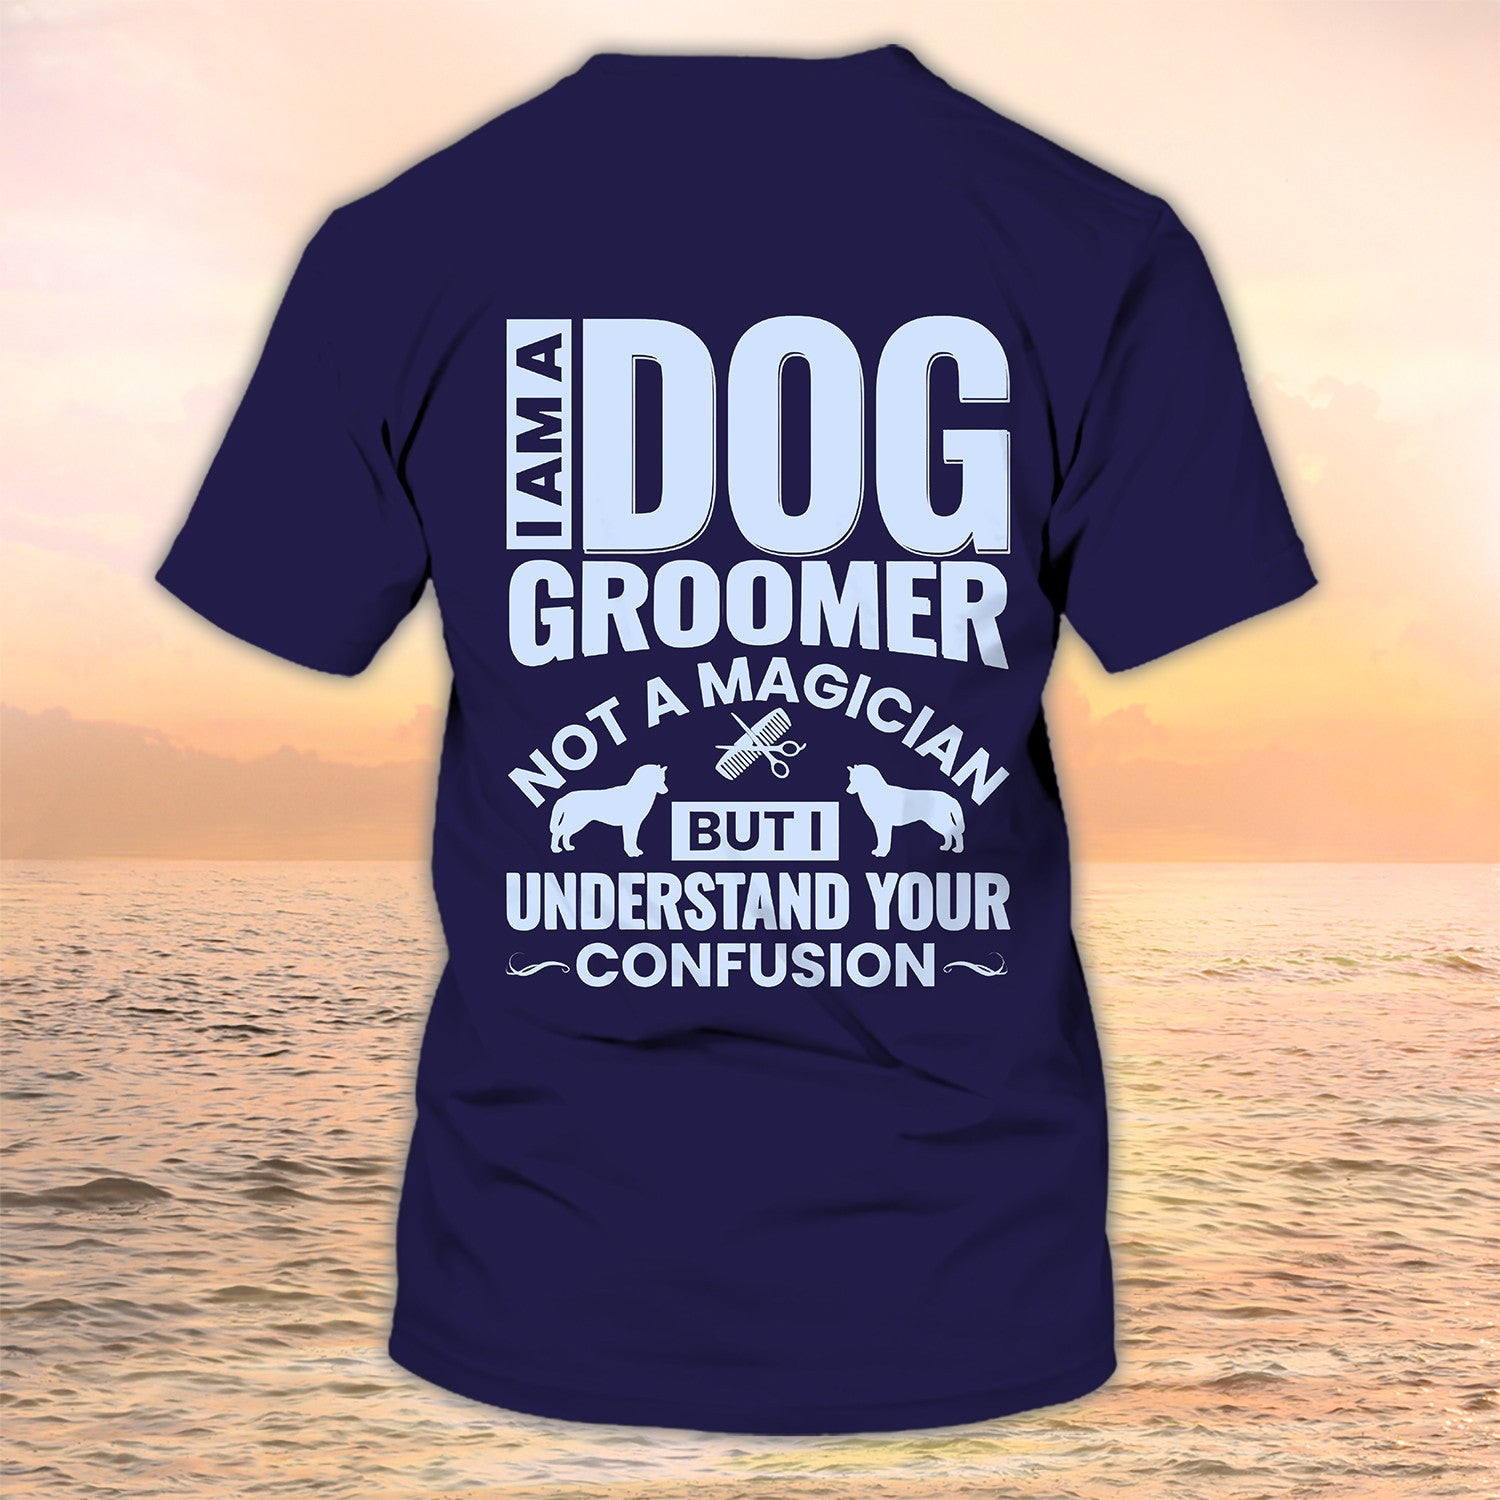 Personalized 3D All Over Printed Dog Groomer Shirt Grooming Uniform I Am A Dog Groomer Not A Magician